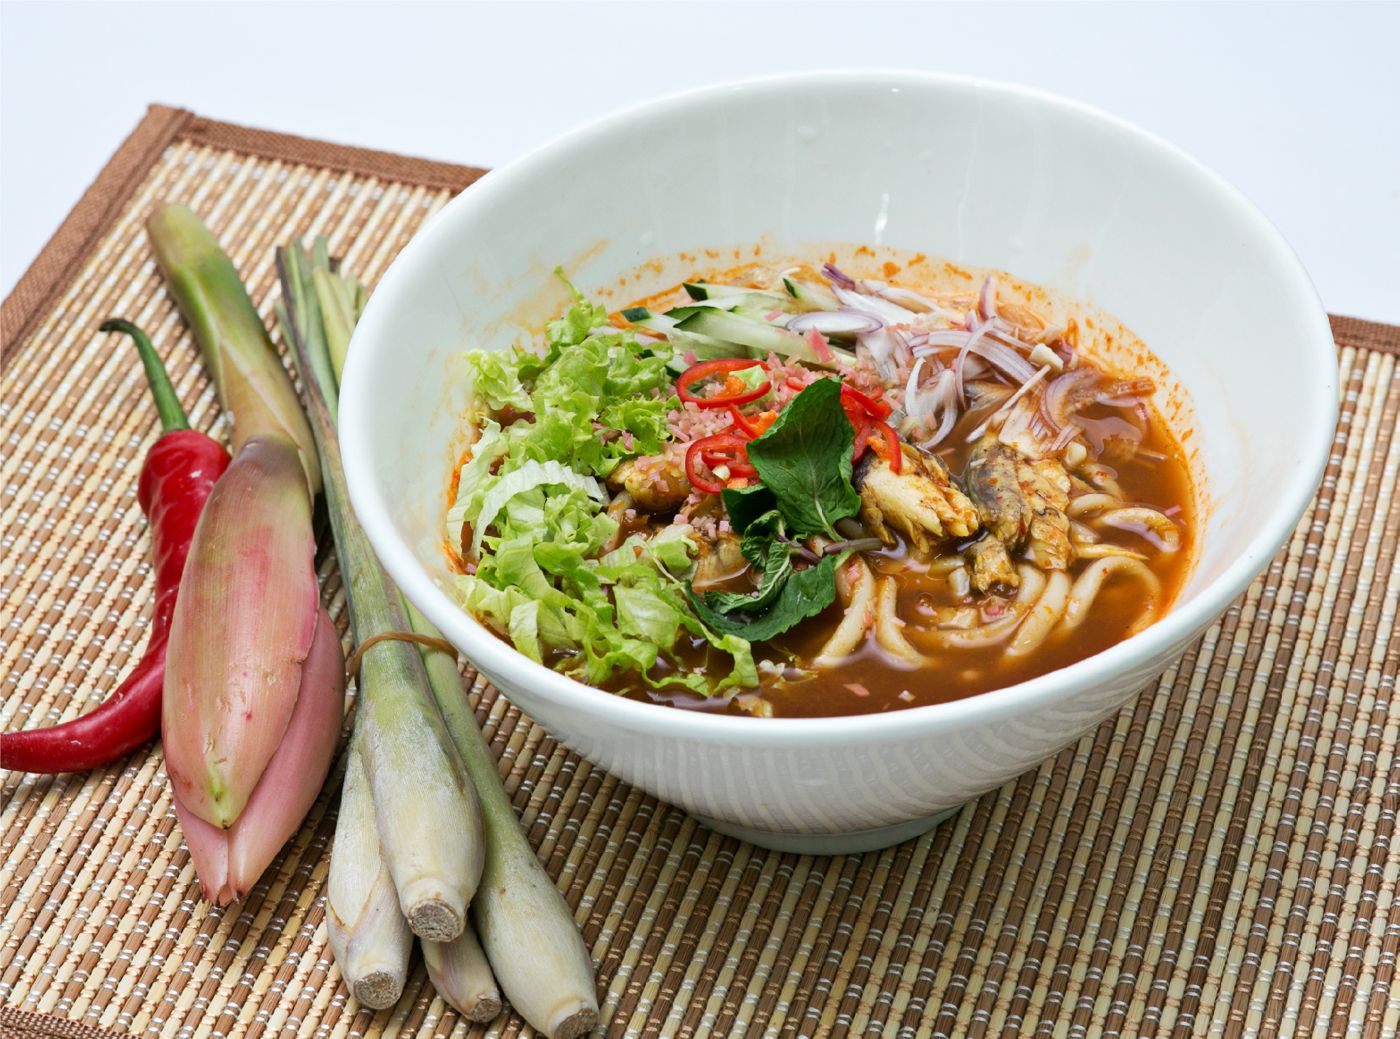 6 laksa dishes you must try in Singapore and Malaysia